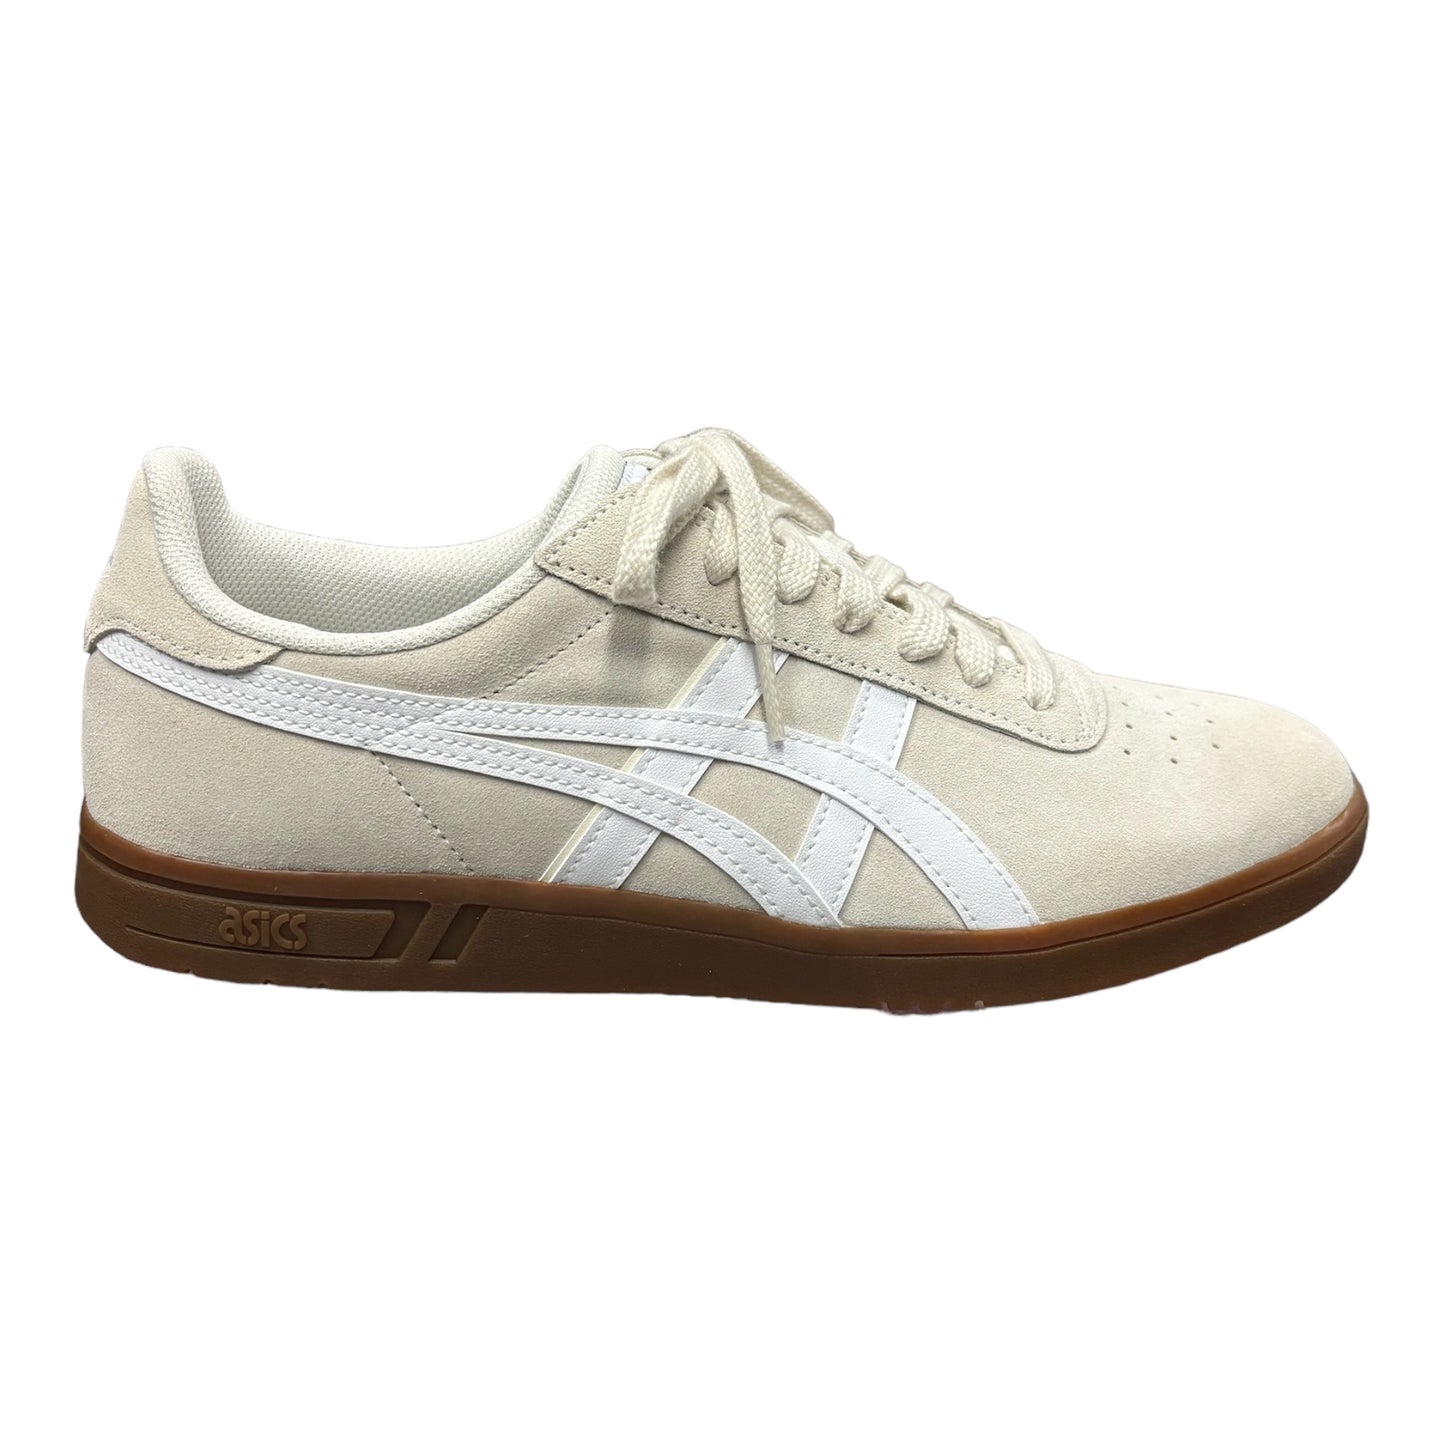 Asics Suede Upper with Gum Outsole and White Logo